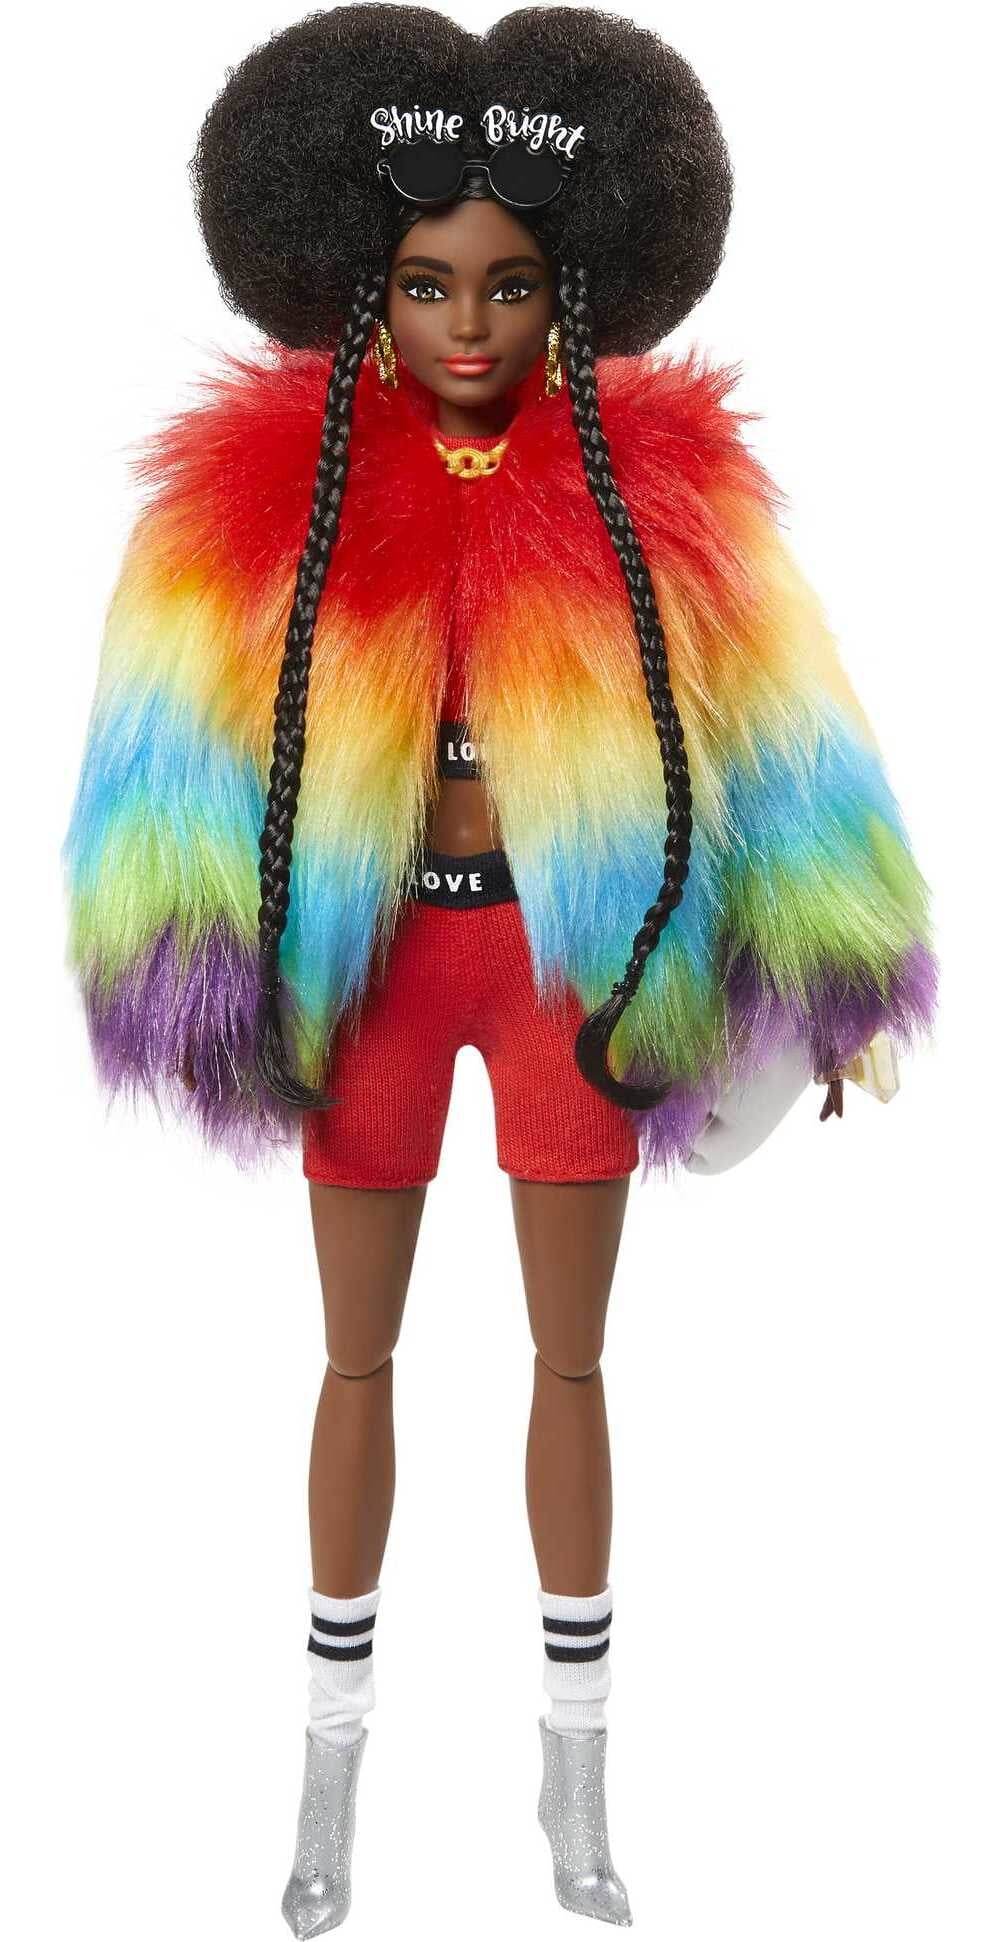 Barbie Extra Fashion Doll with Afro-Puffs in Shaggy Rainbow Coat